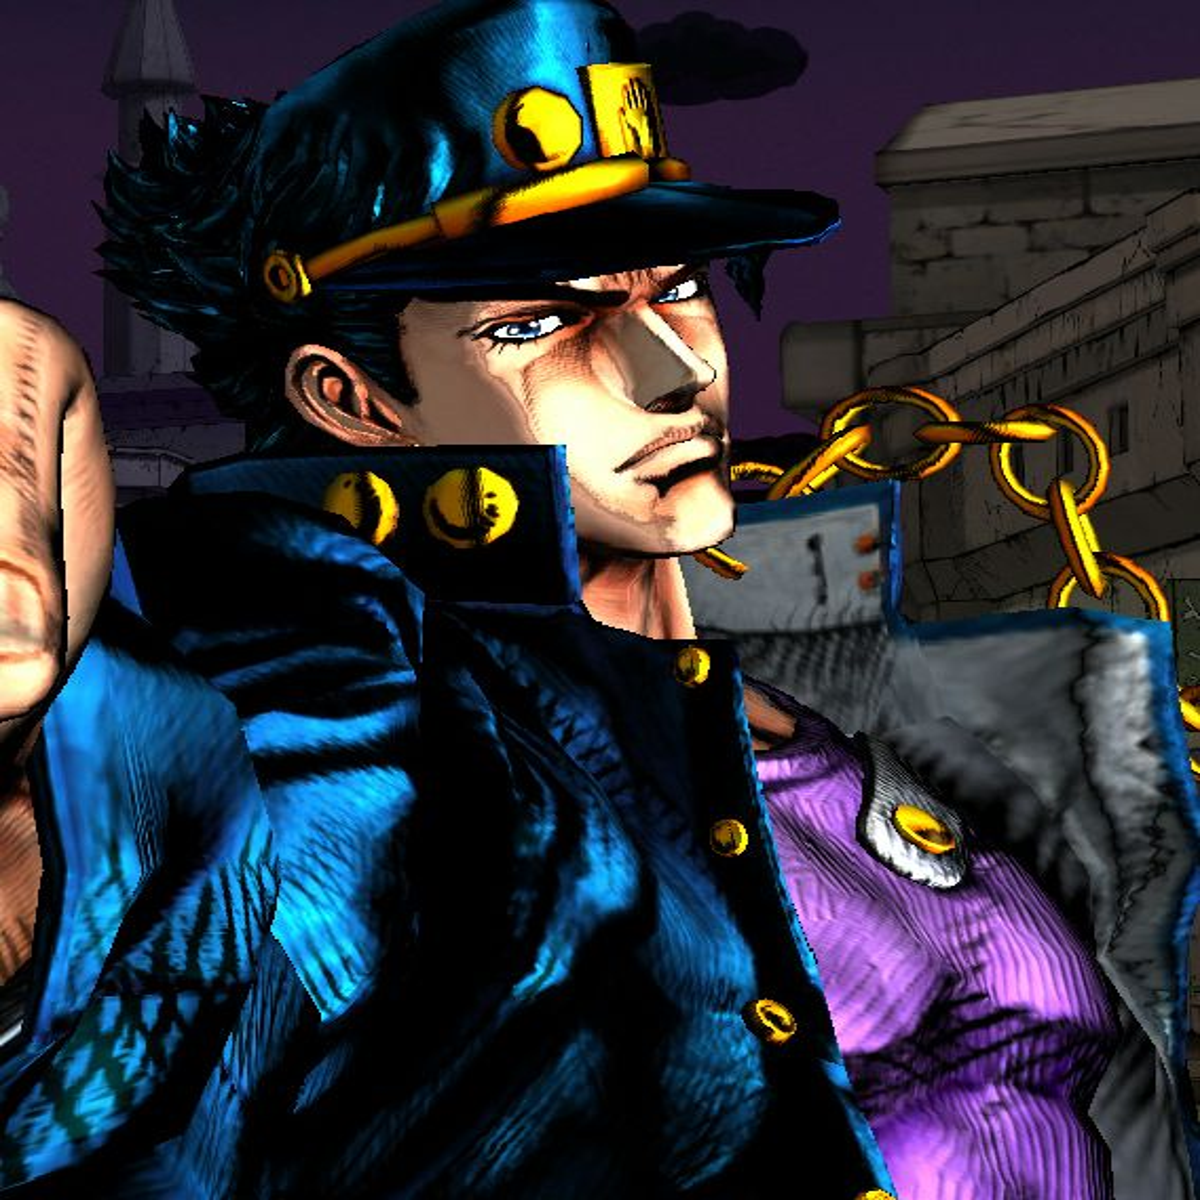 Found a fun jojo roblox game where you can customize your stand